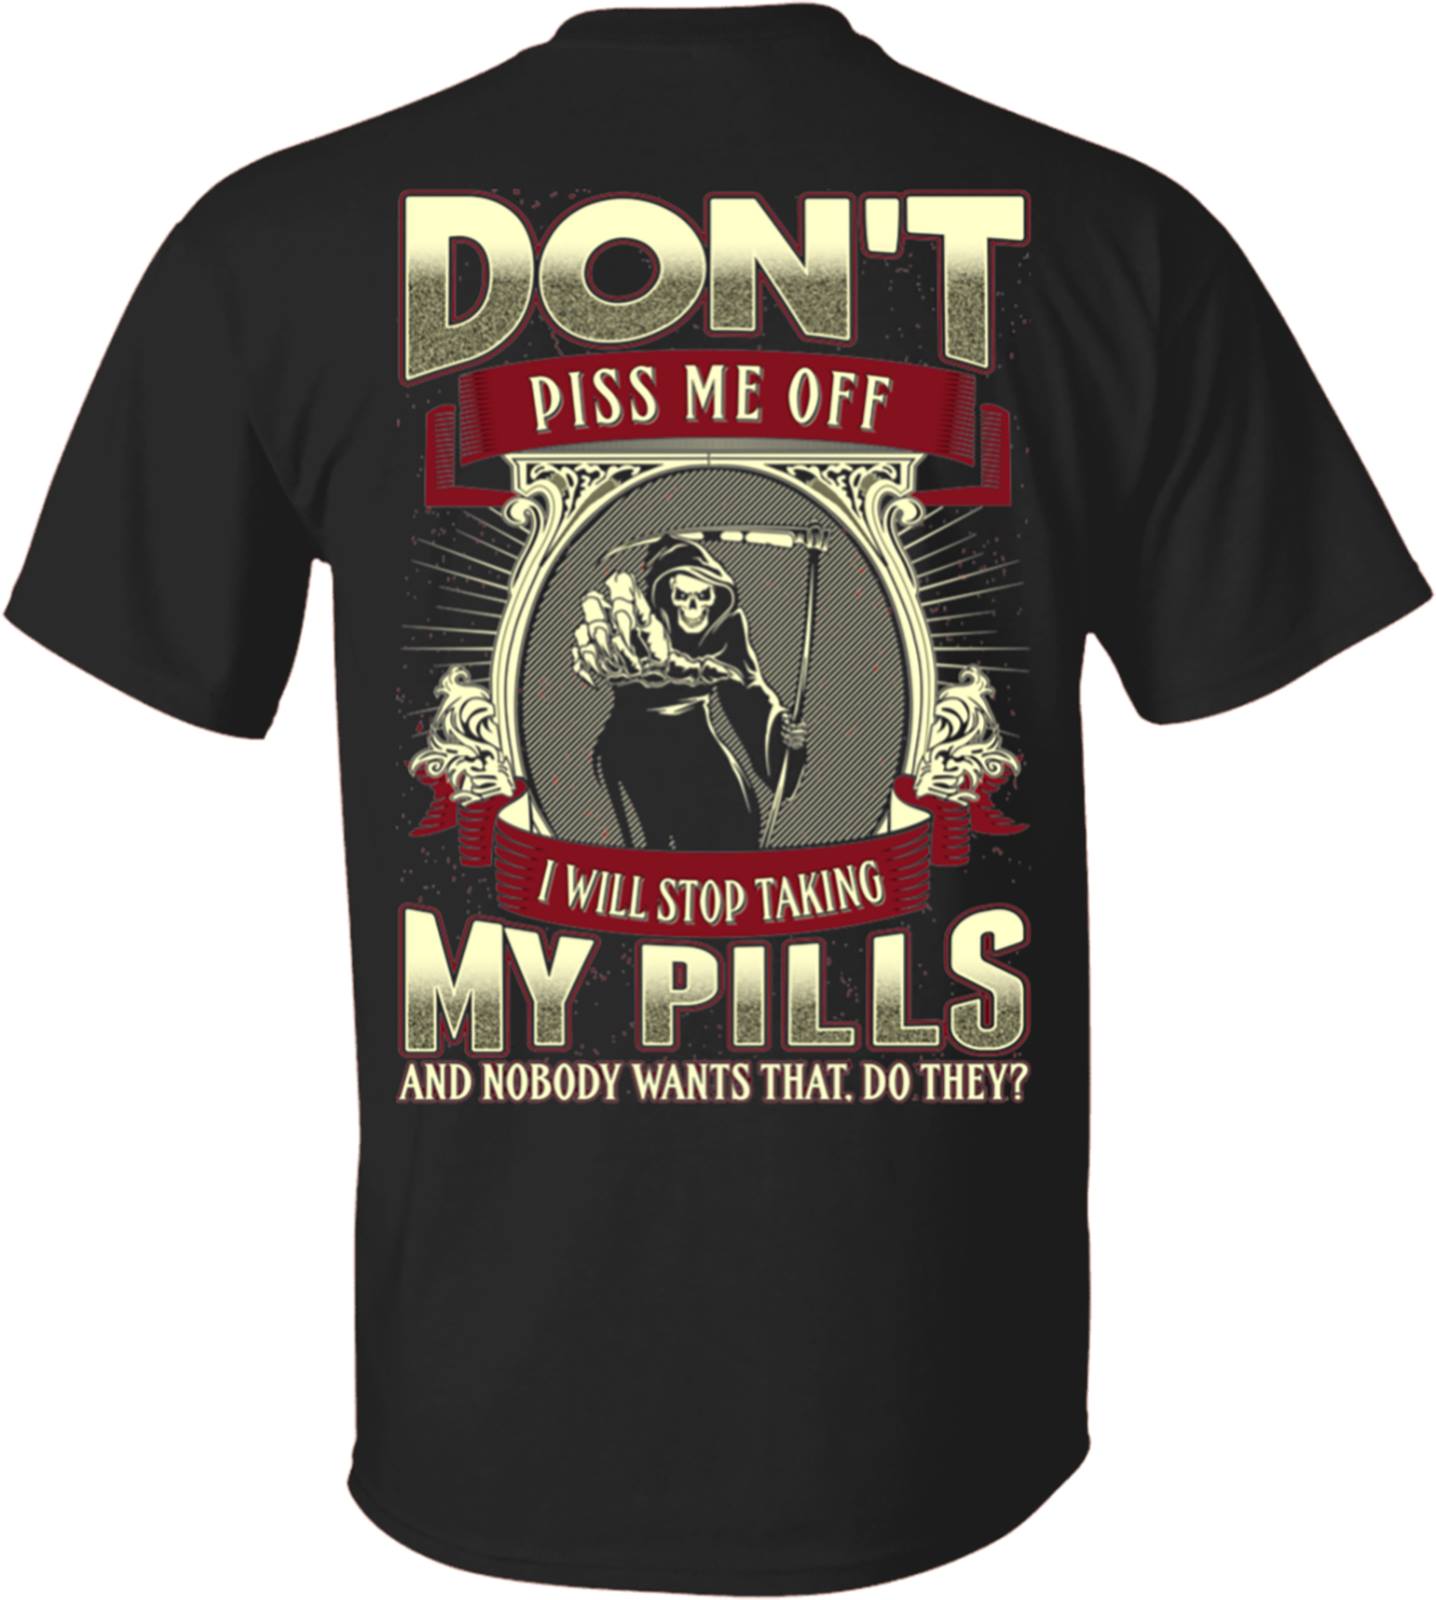 Don't piss me off I will stop taking my pills and nobody wants that - Black evil